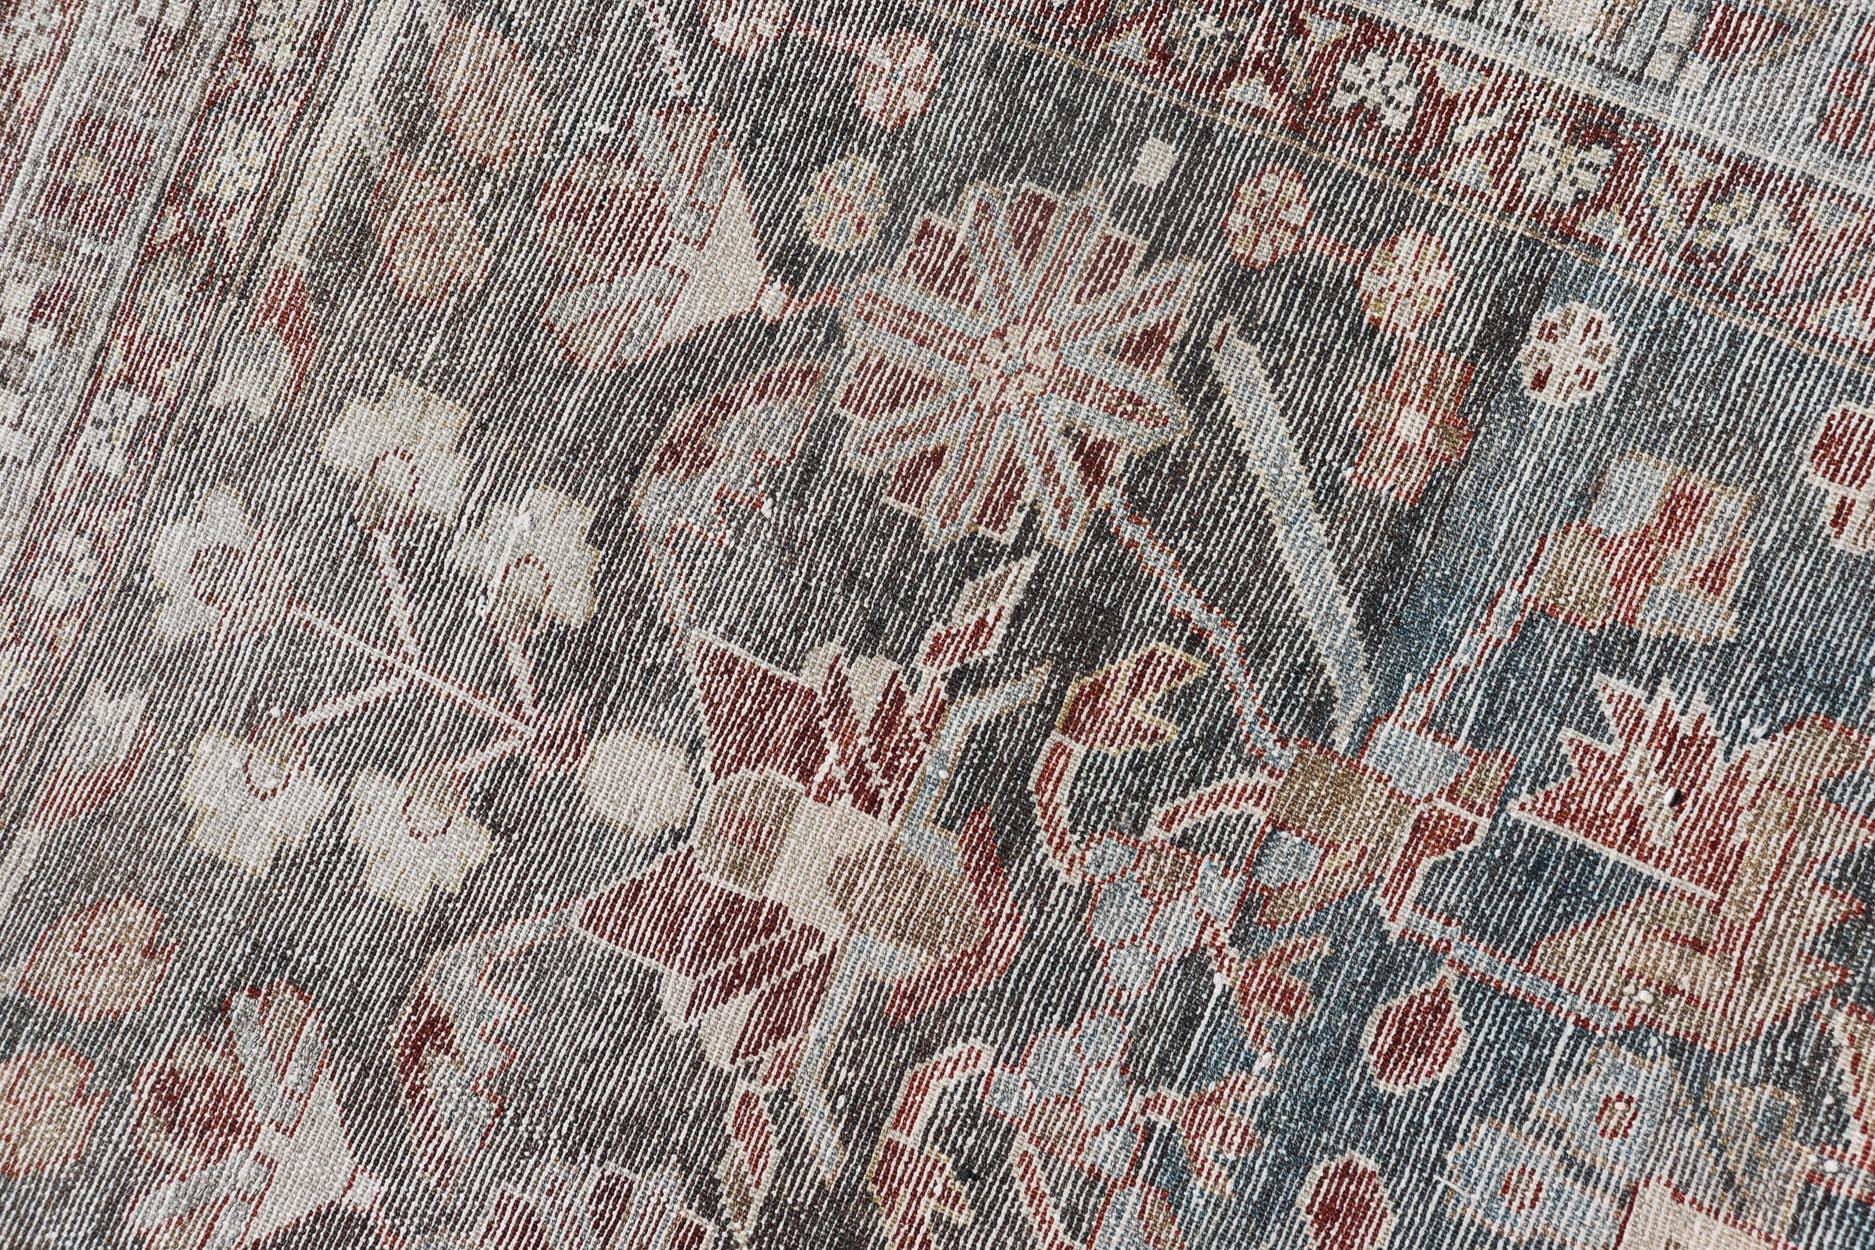 Antique Malayer Runner with Geometric Designs in Gray, Blue, Red, and Tan For Sale 5